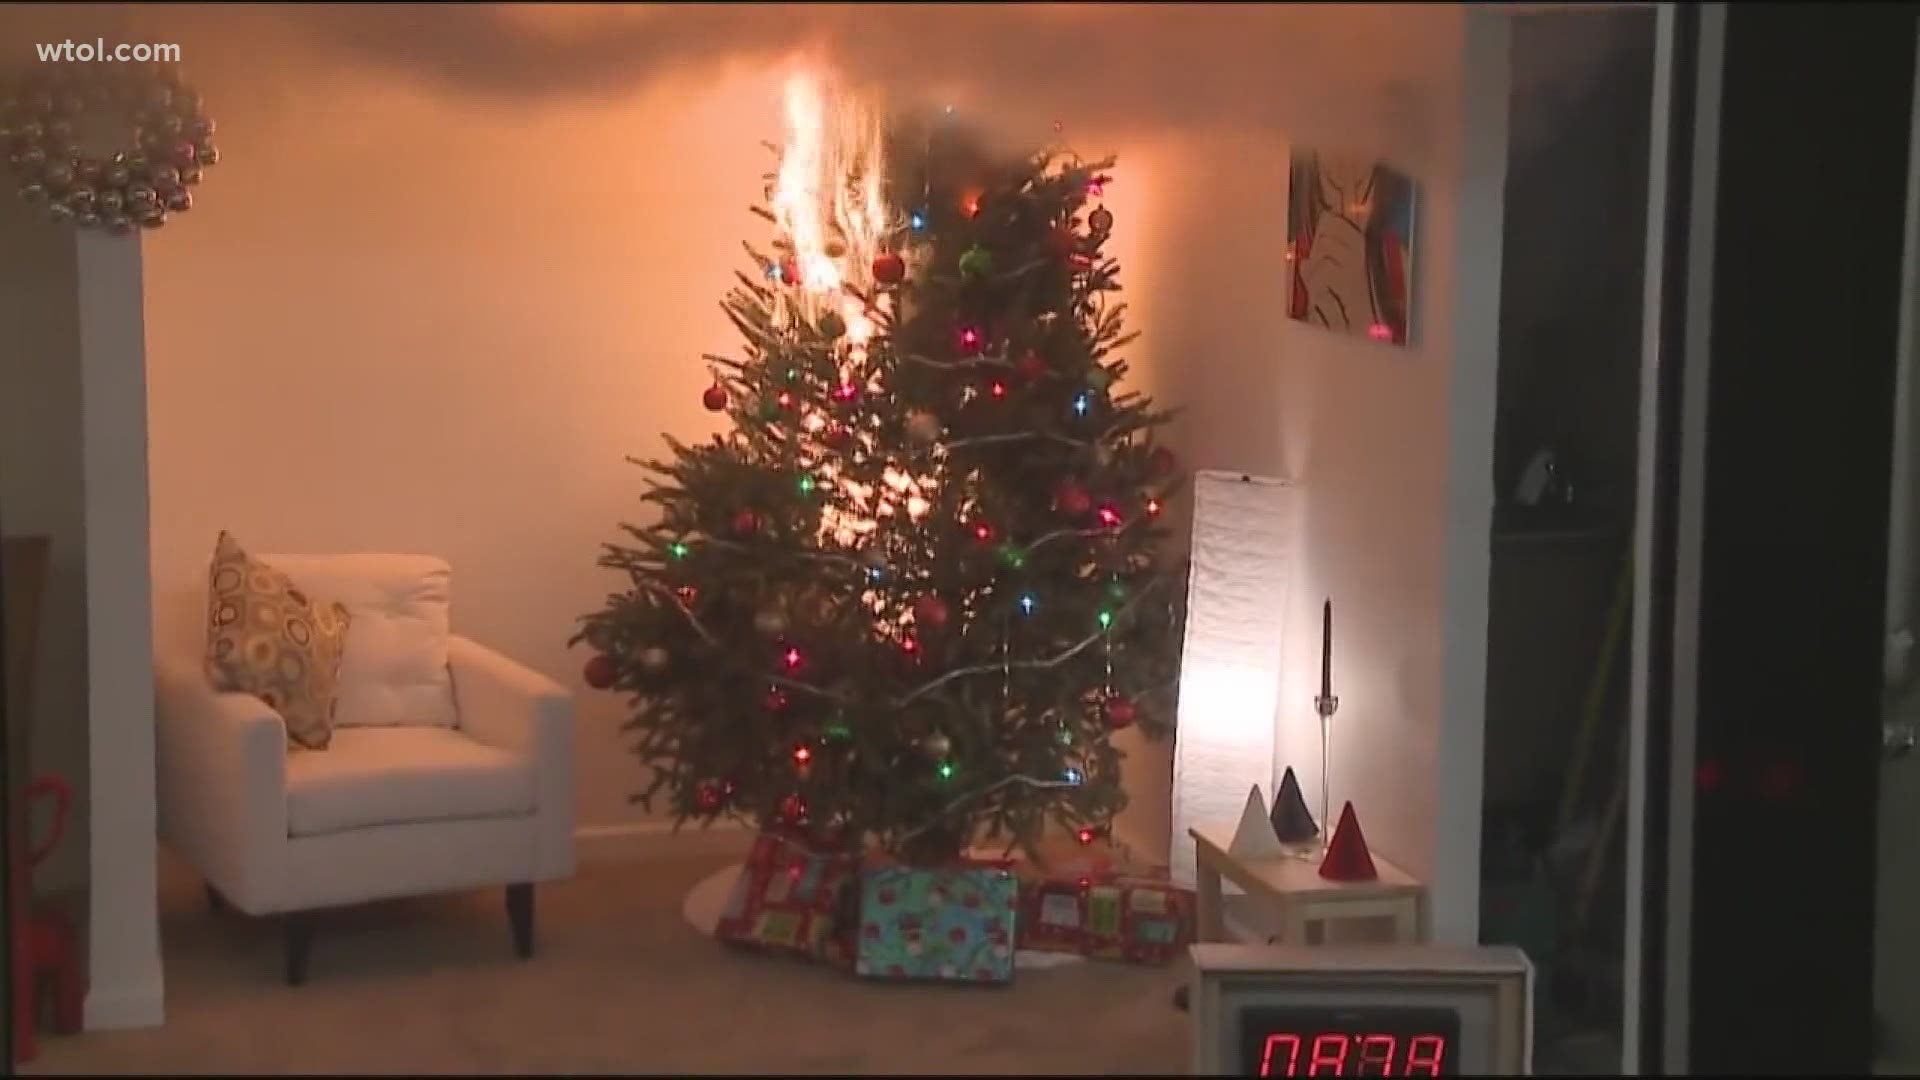 Many people are planning to keep the holiday cheer going a little longer this year.